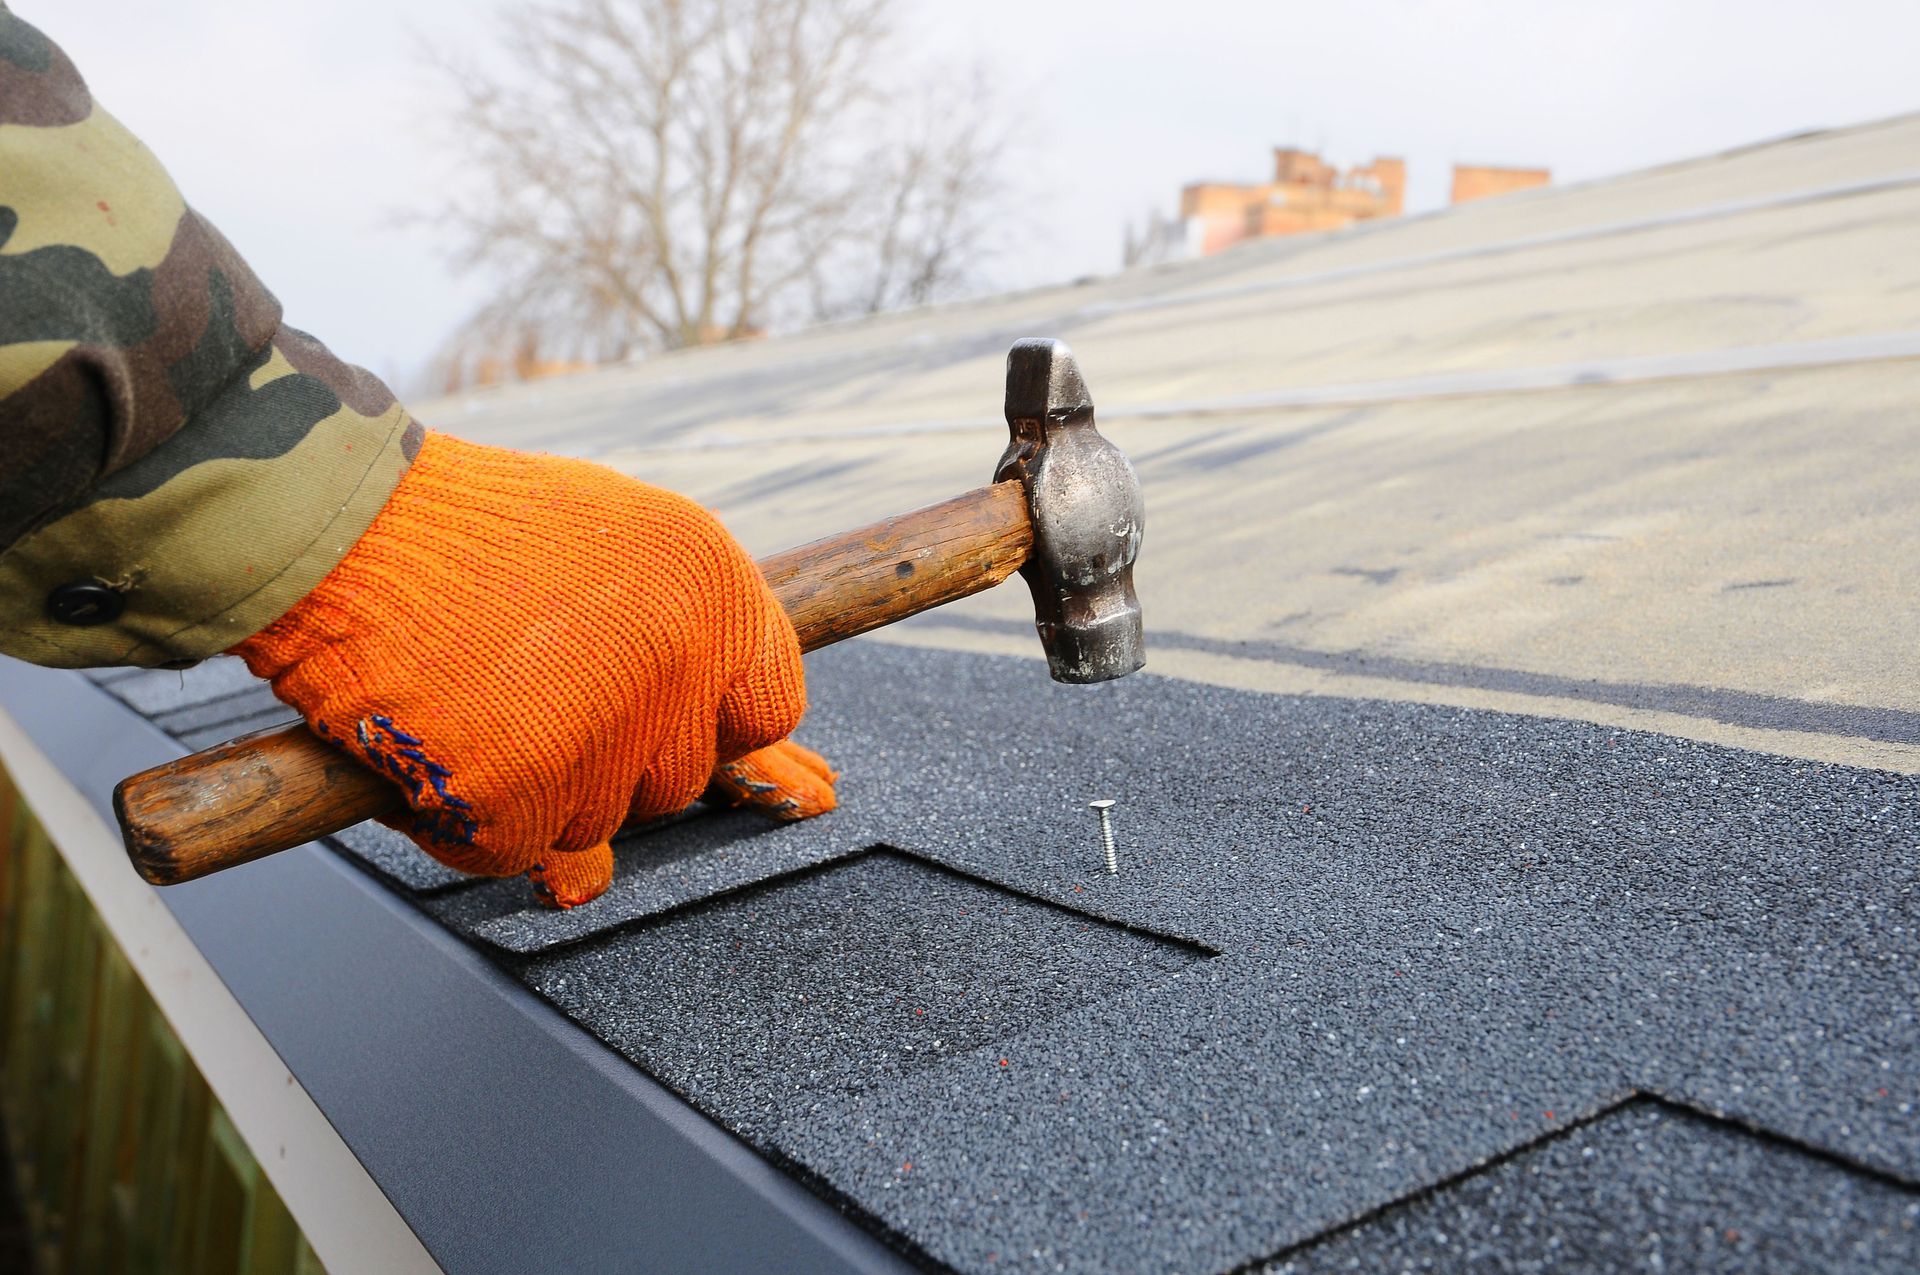 residential roofing company